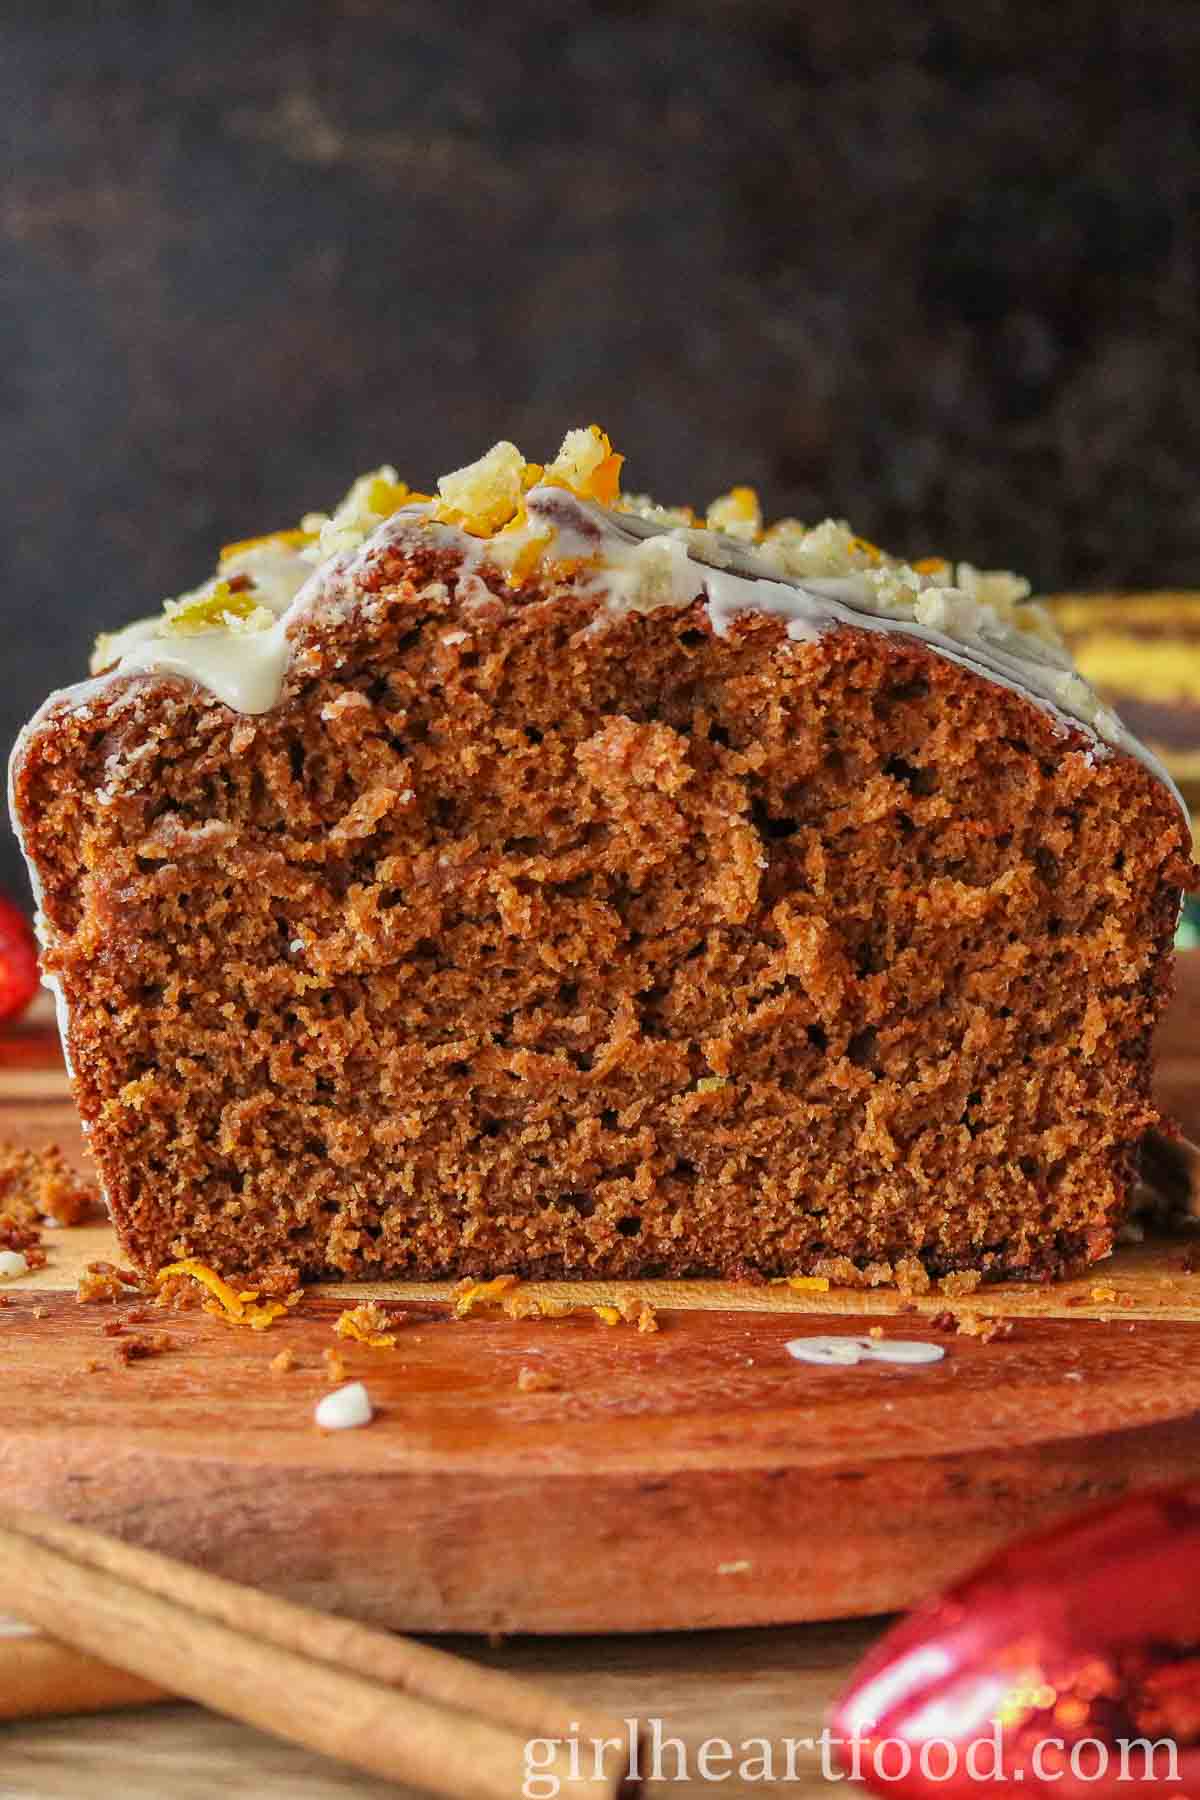 Cut icing sugar glazed banana gingerbread loaf, showing the interior texture.